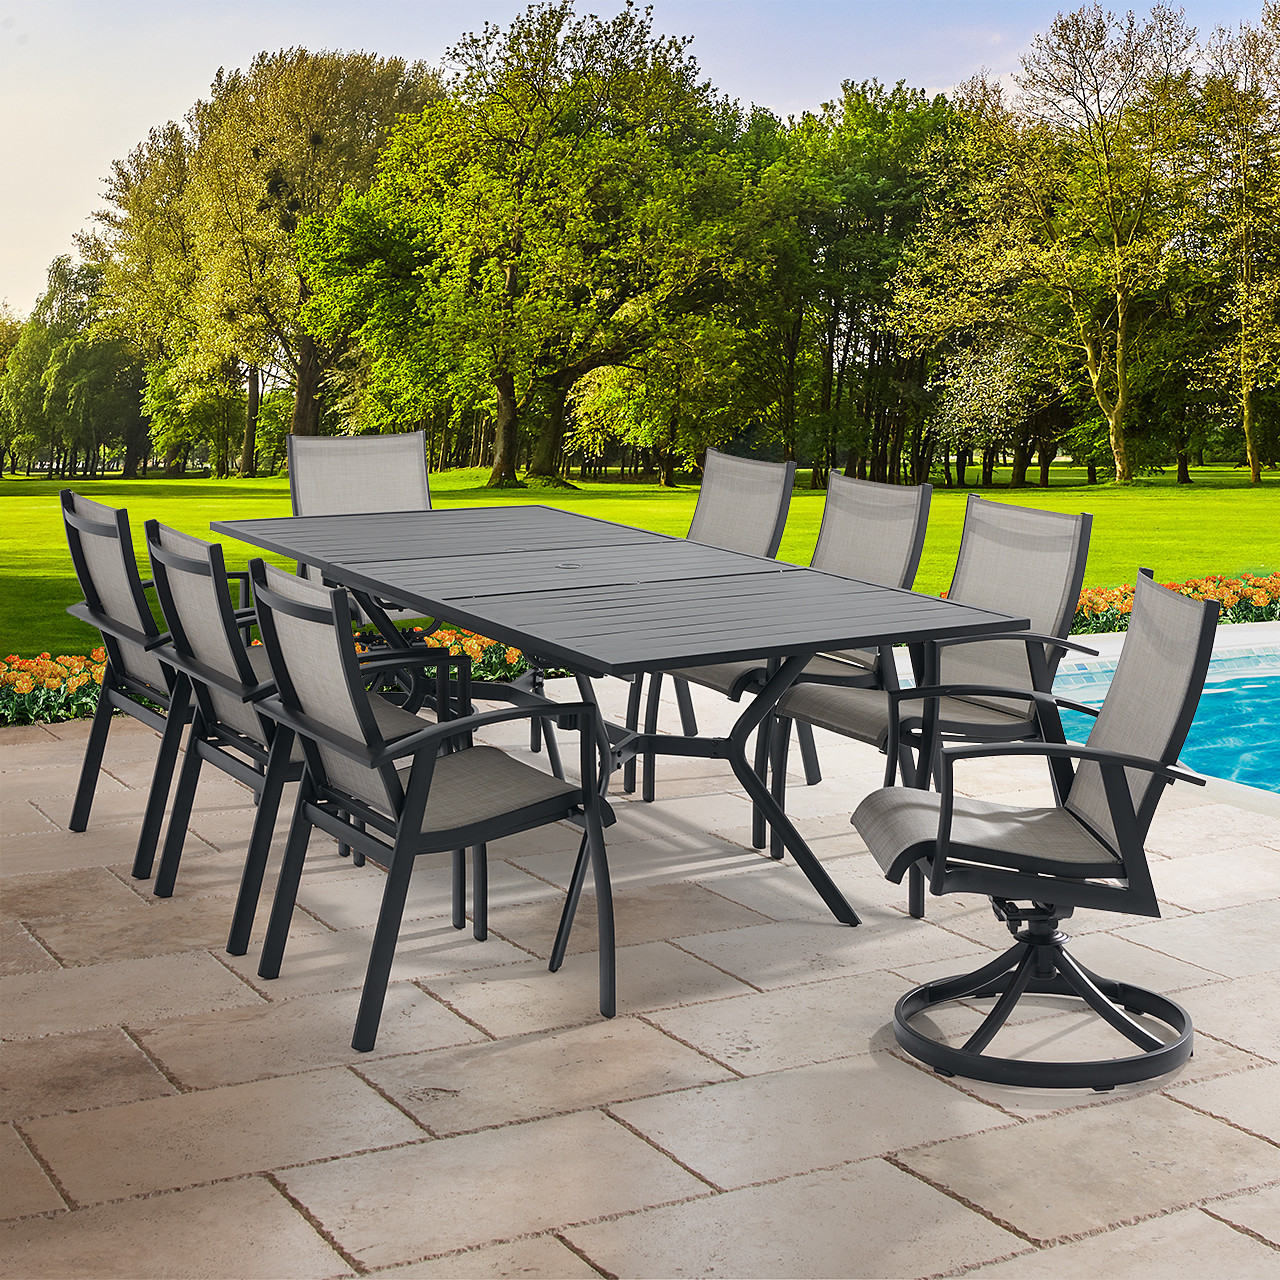 Ventura Textured Black Aluminum with Mica Pearl Sling 9 Piece Combo Dining Set + 74-94 x 44 in. Table